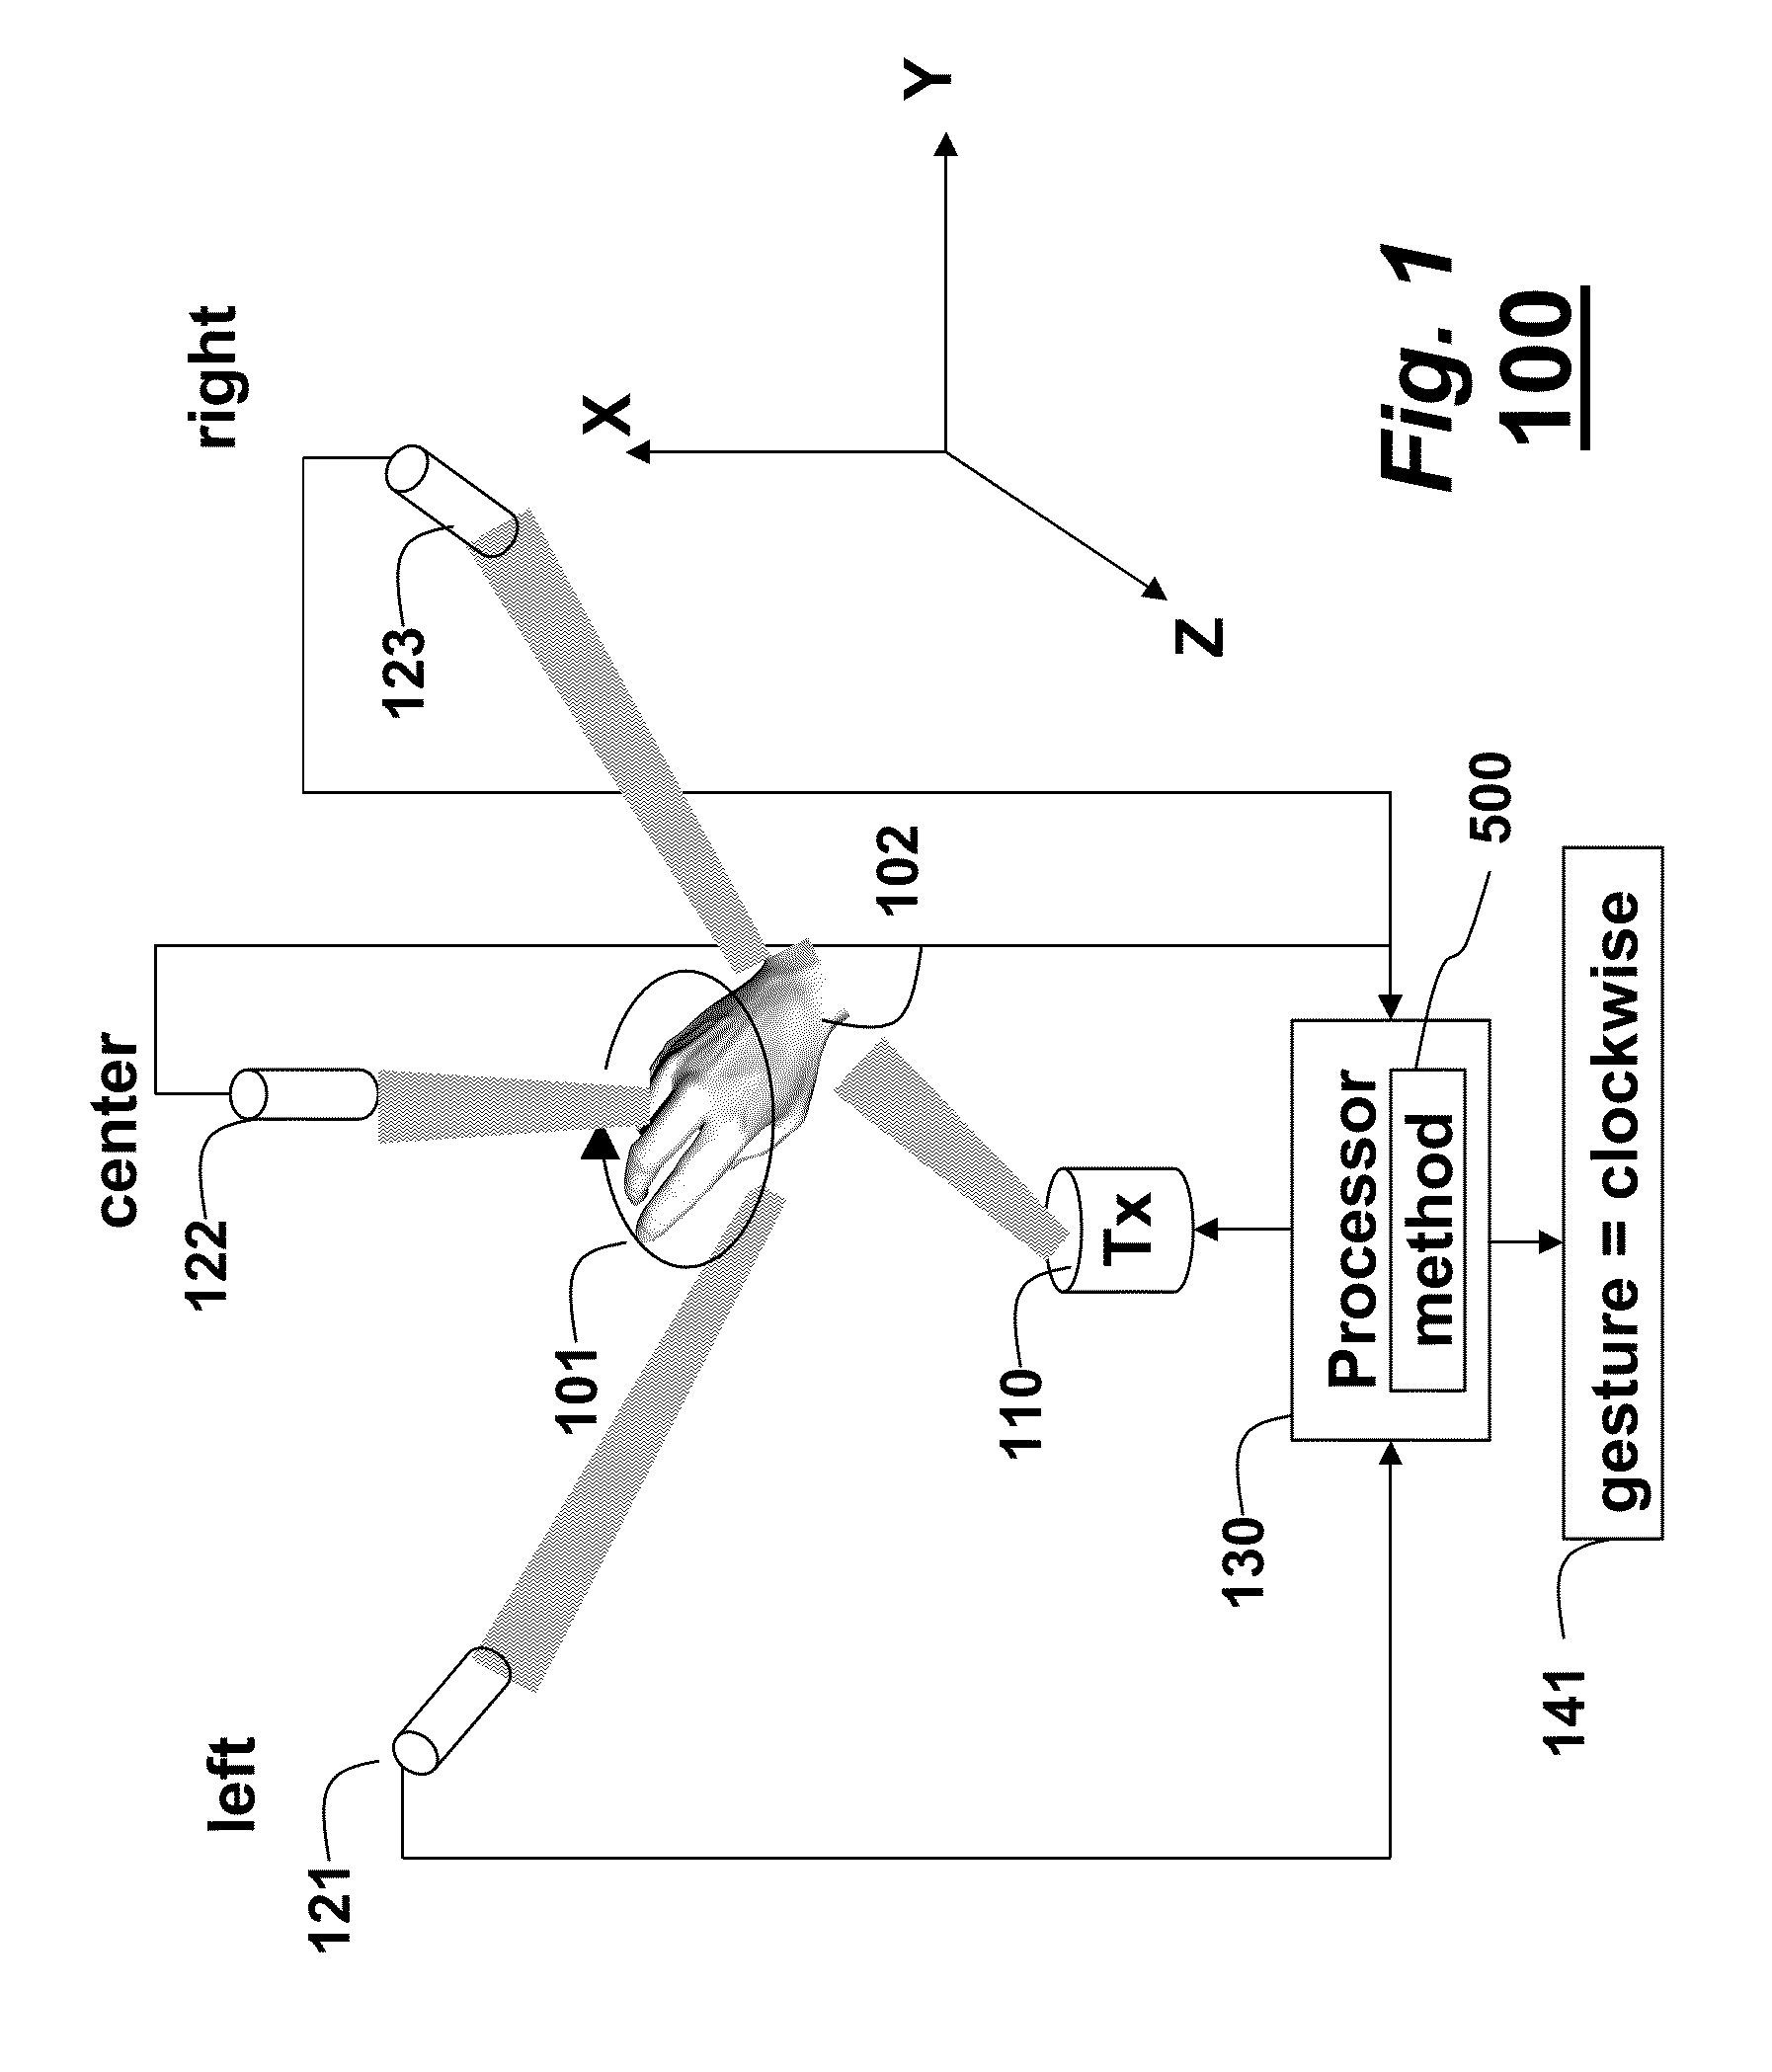 Ultrasonic Doppler System and Method for Gesture Recognition